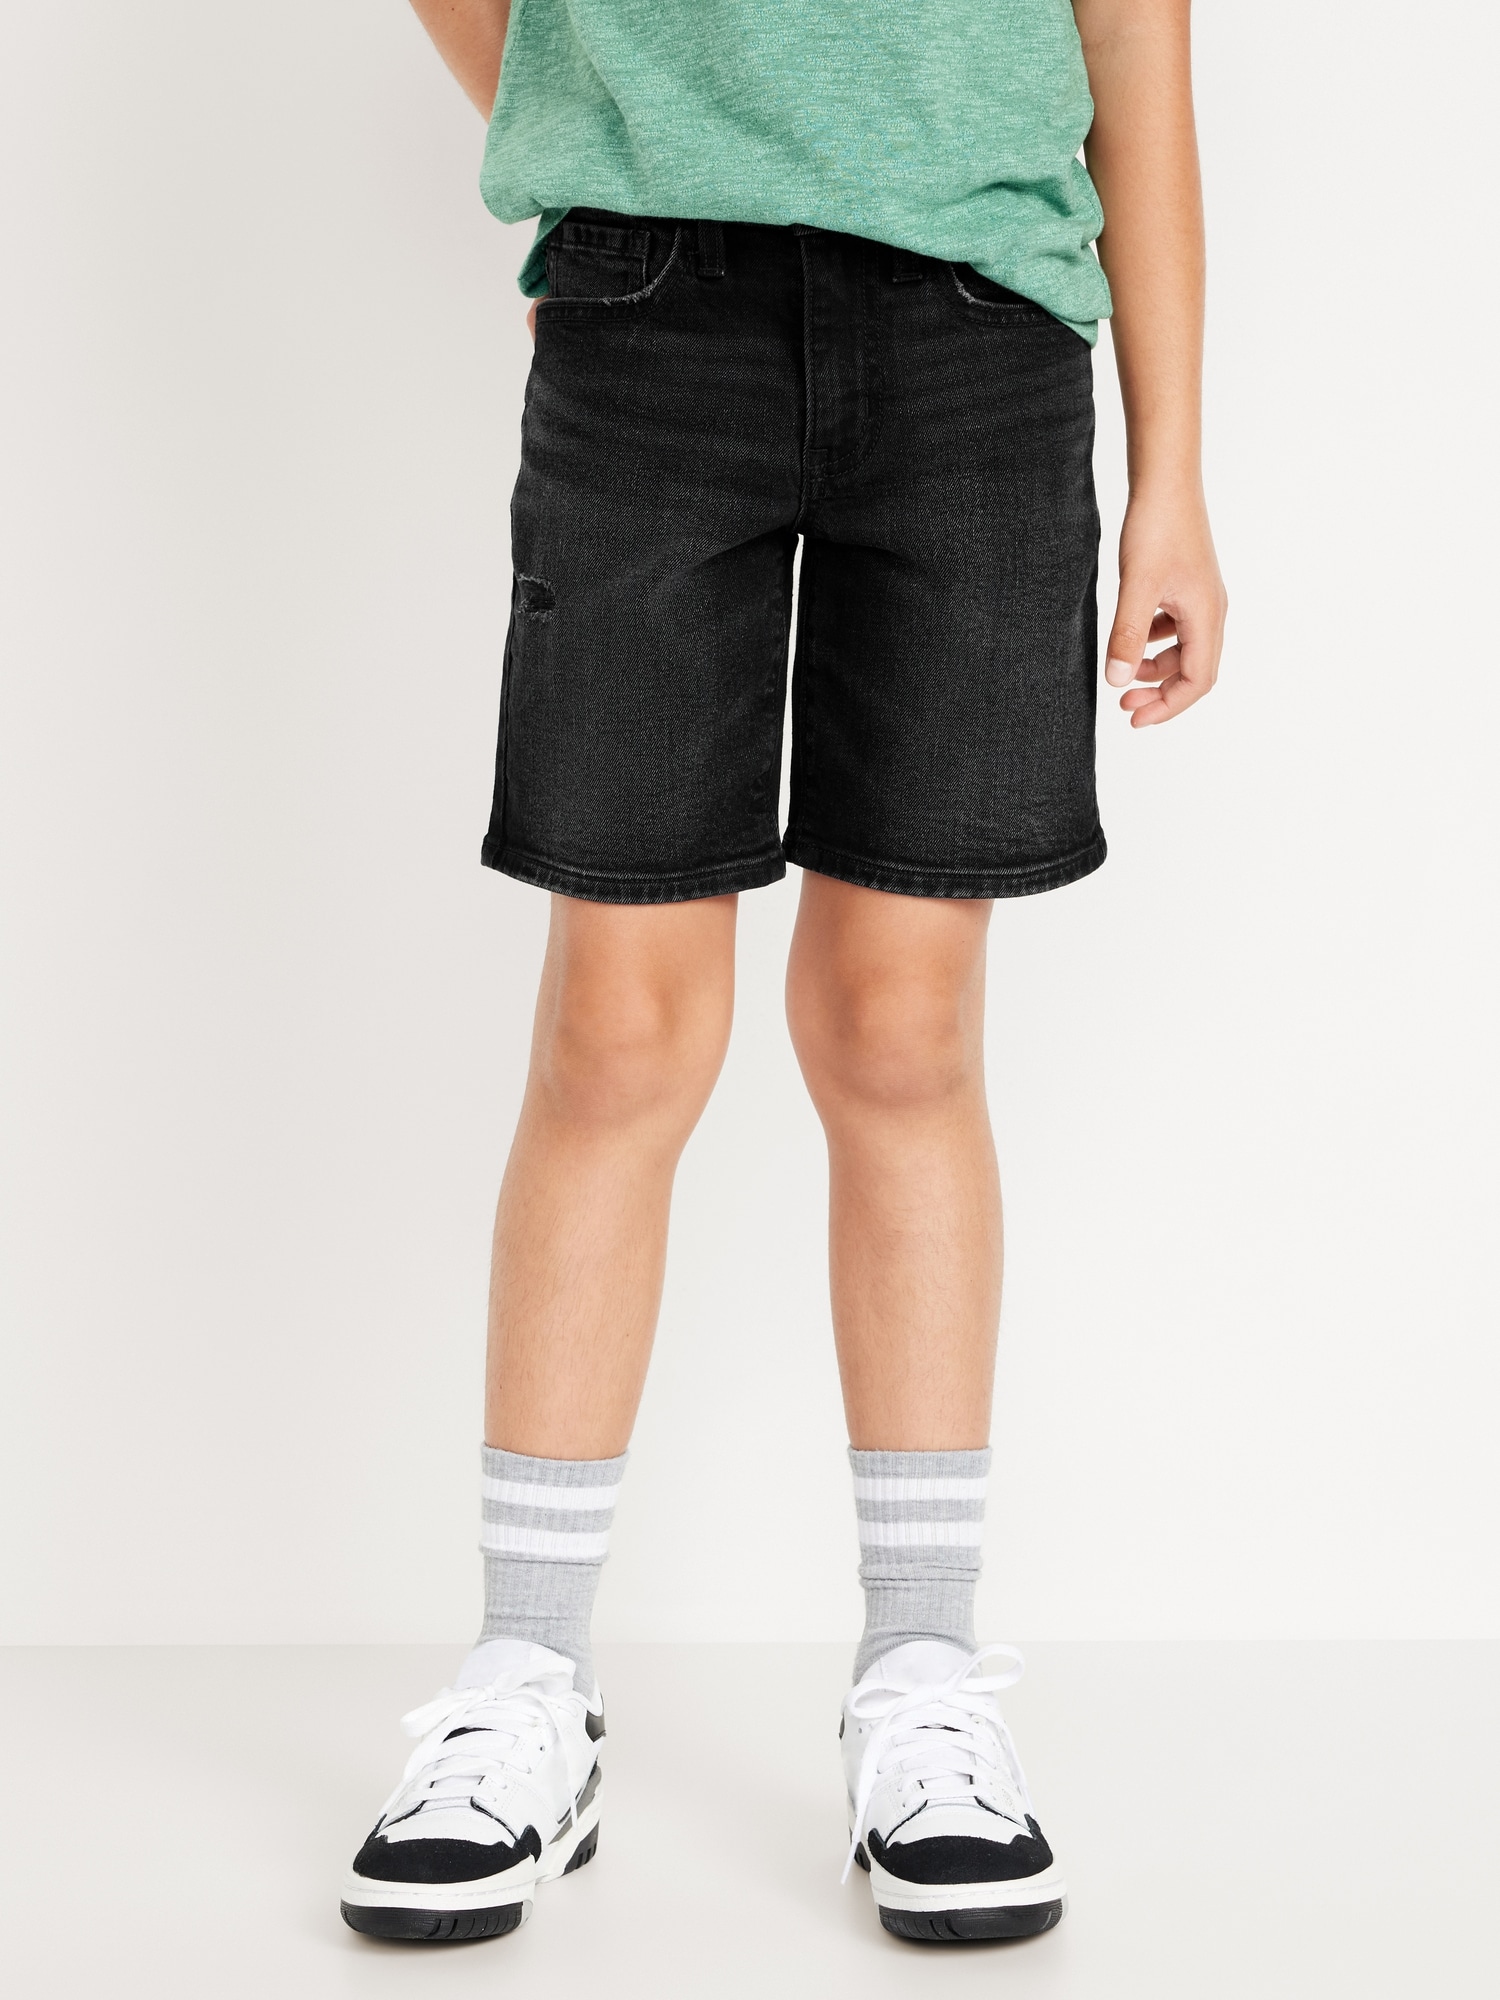 Above Knee 360° Stretch Ripped Jean Shorts for Boys Hot Deal